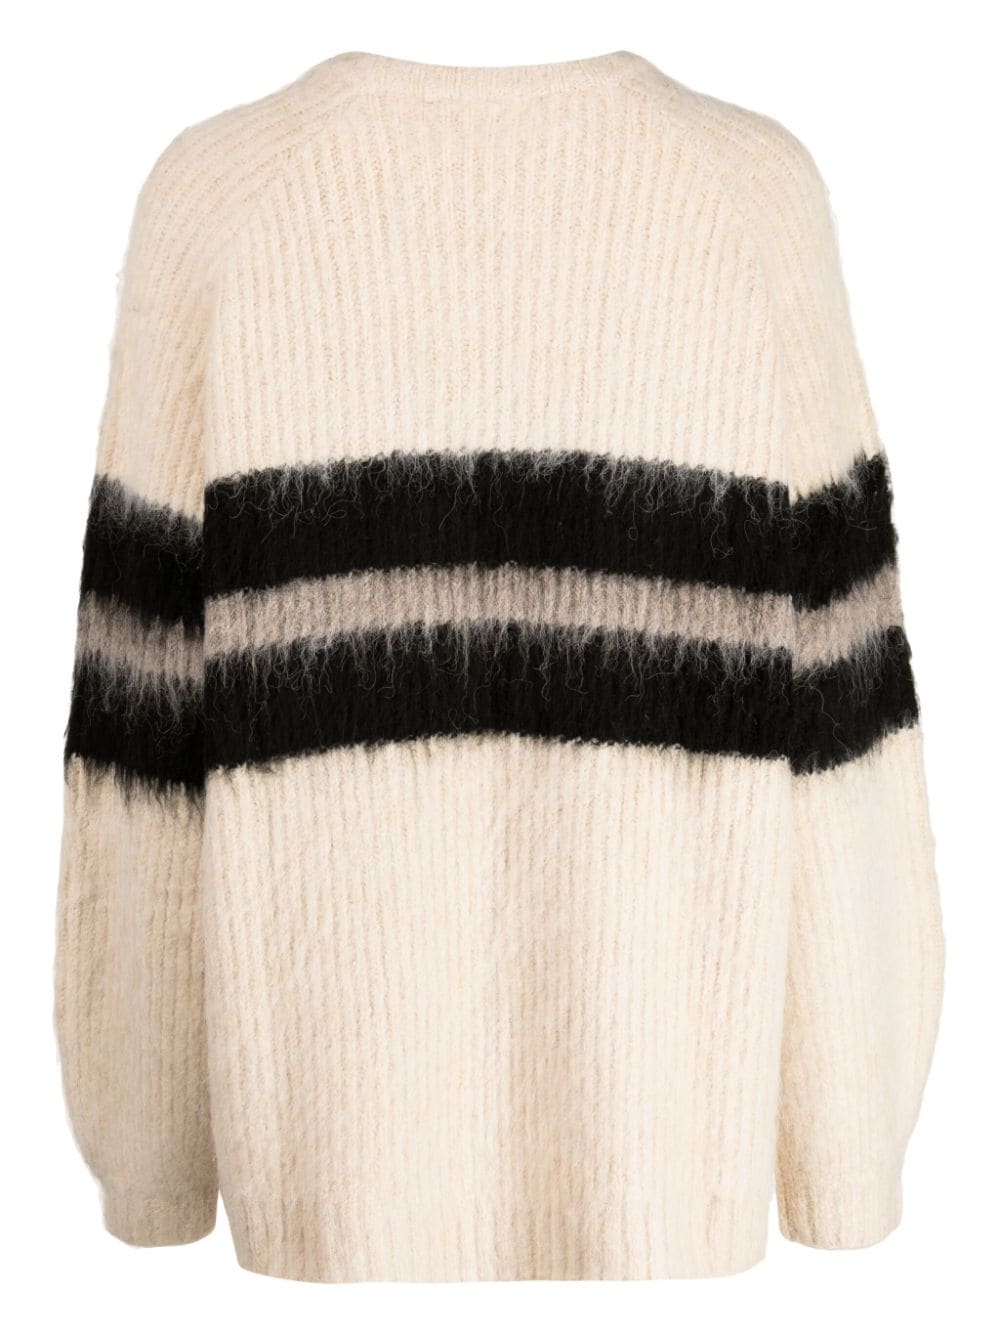 tout a coup brushed crew-neck jumper - Beige